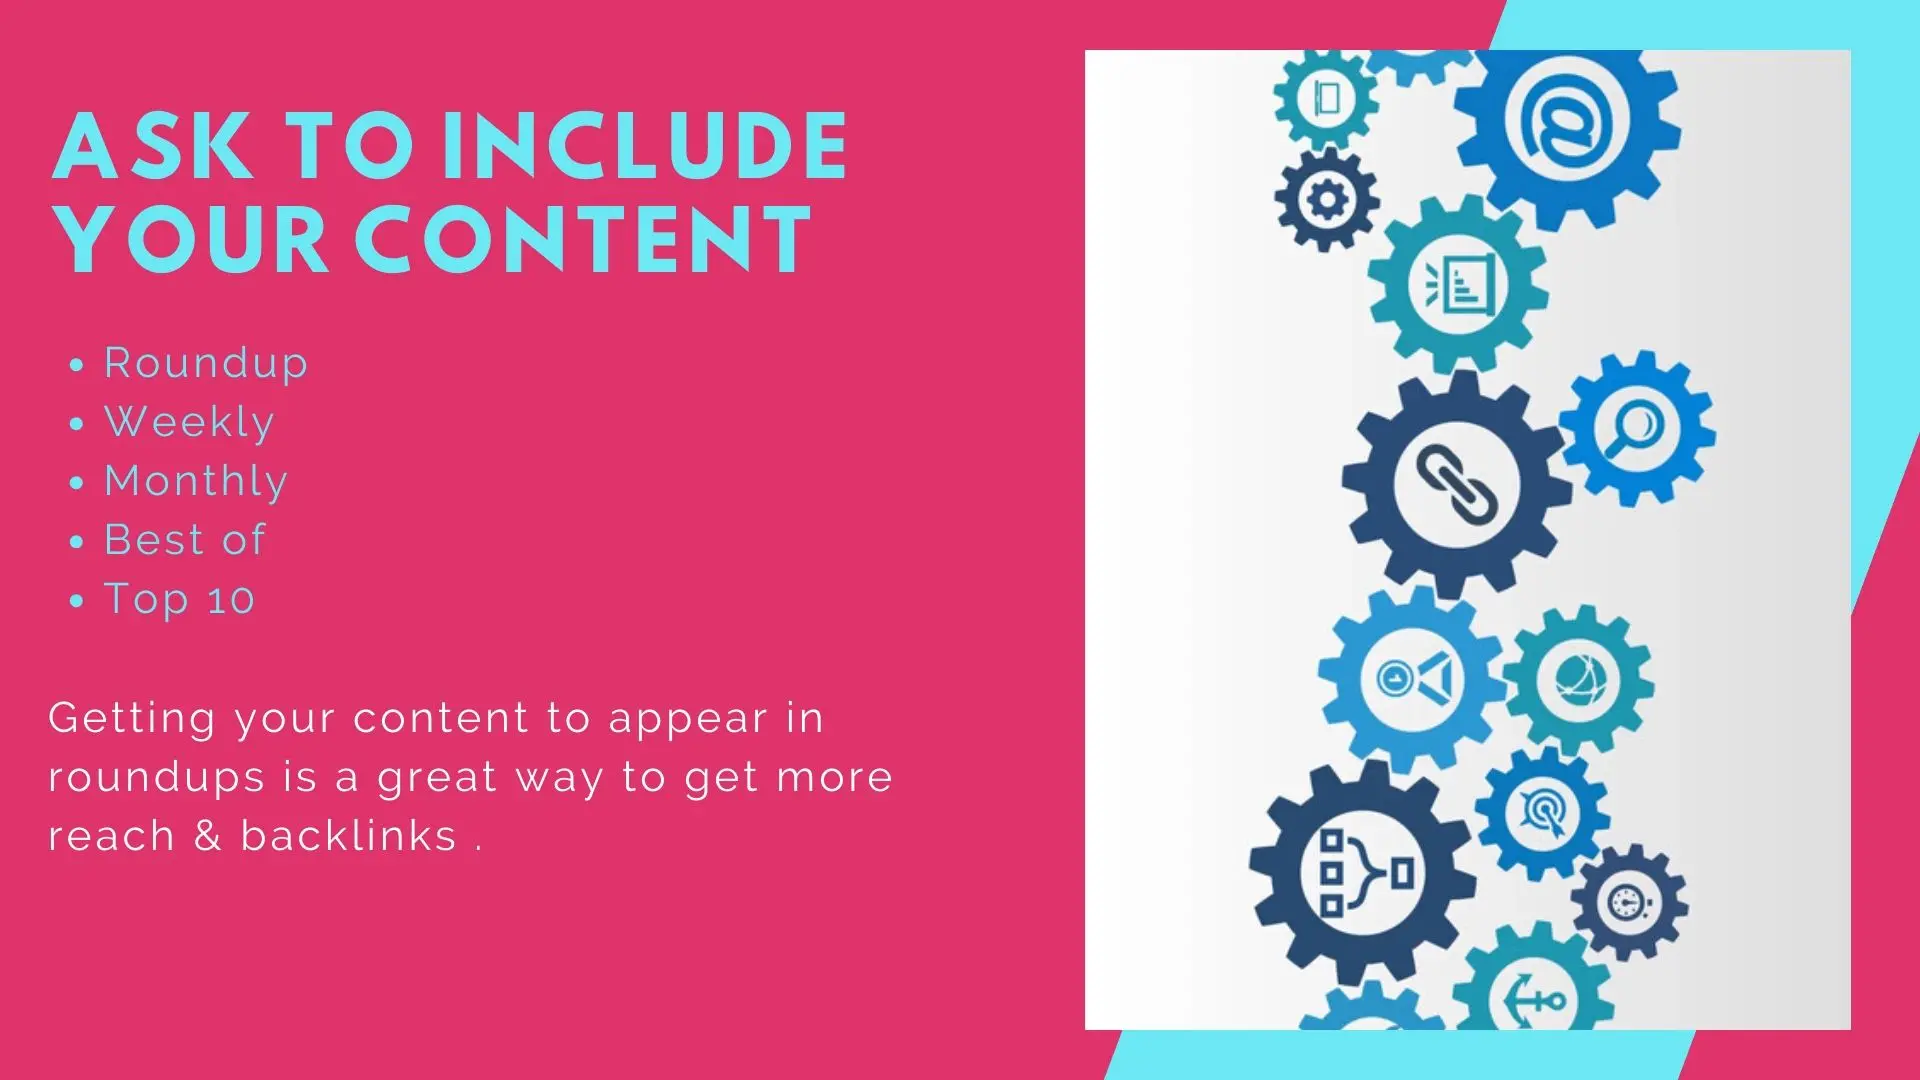 Content - Ask to include your content